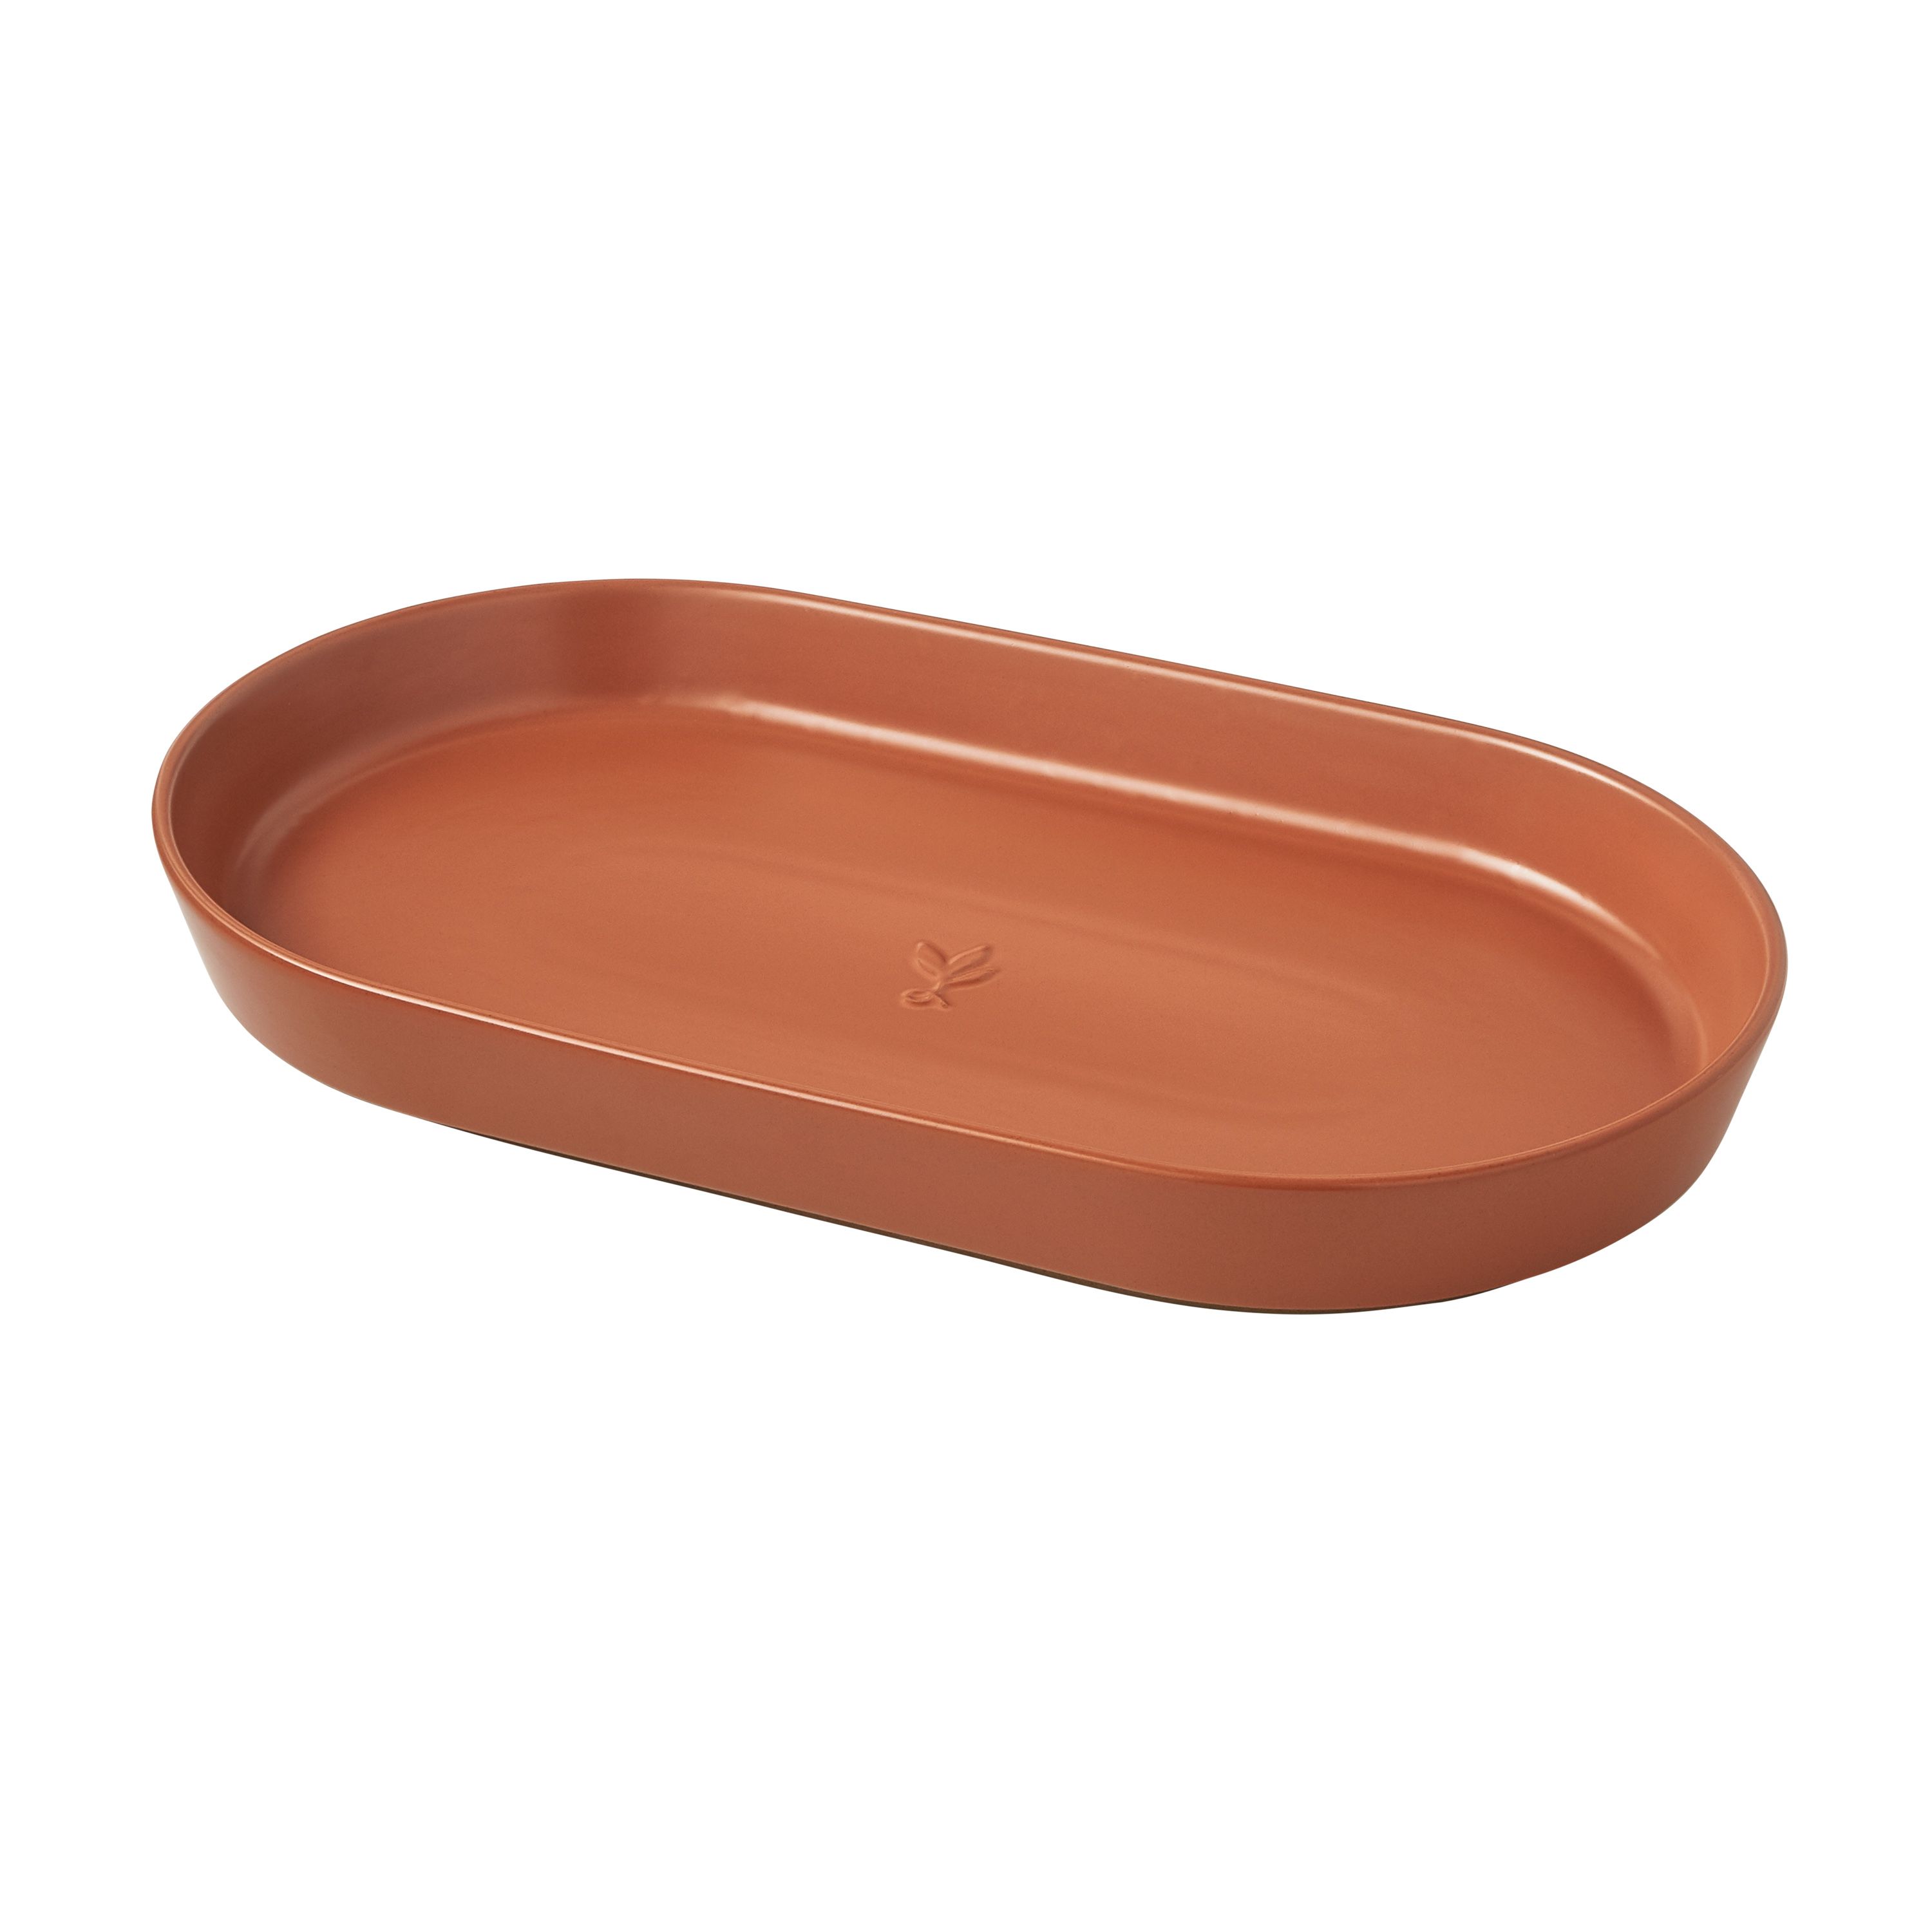 Better Homes & Gardens Copper Oval Stoneware Serve Tray by Dave & Jenny Marrs | Walmart (US)